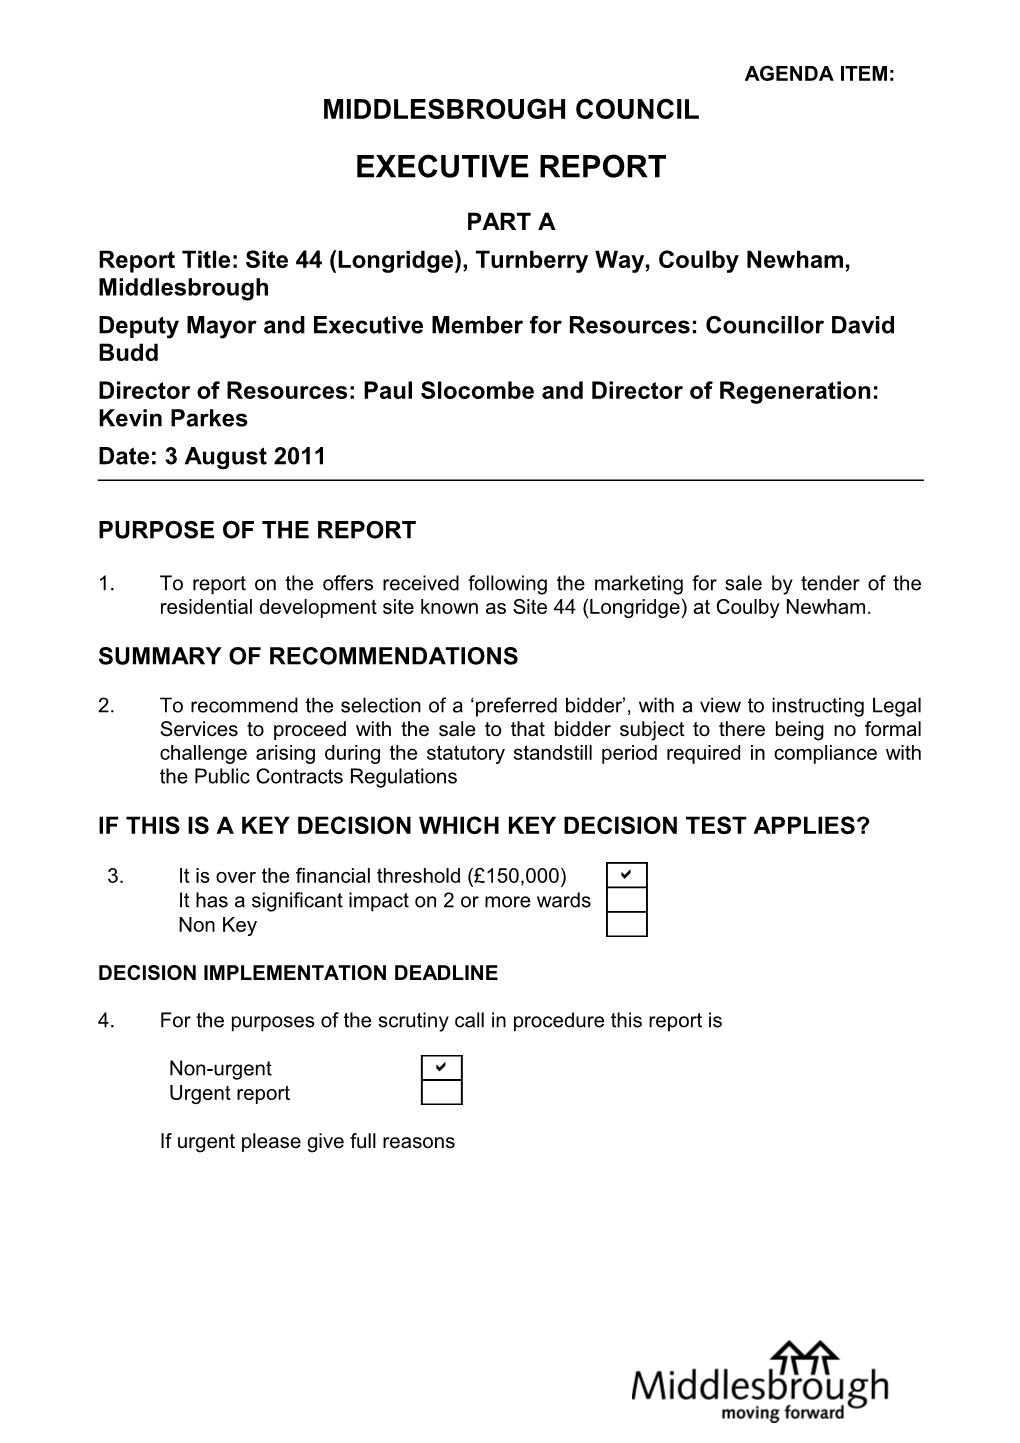 Report Title:Site 44 (Longridge), Turnberry Way, Coulby Newham, Middlesbrough